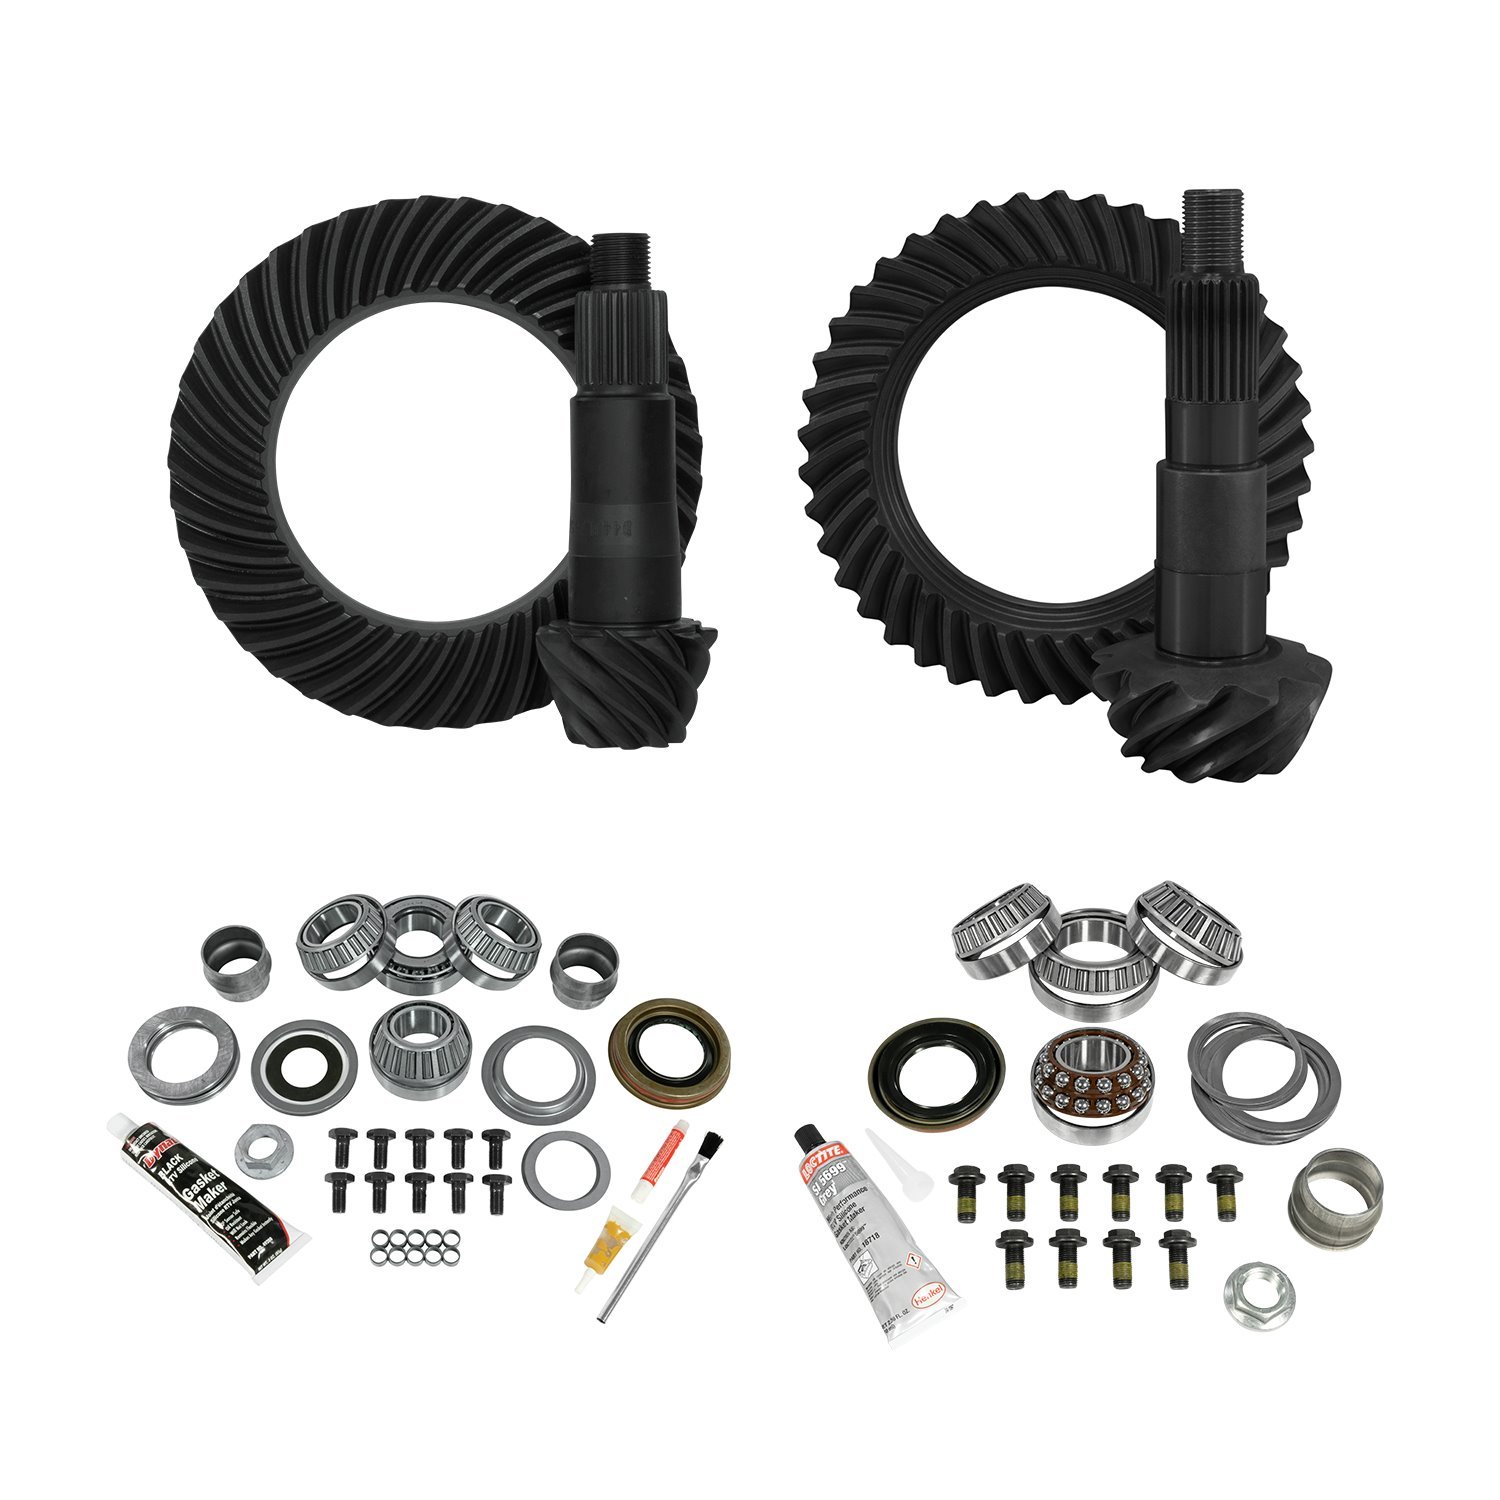 Re-Gear And Install Kit, D30 Front/D44 Rear, Jeep